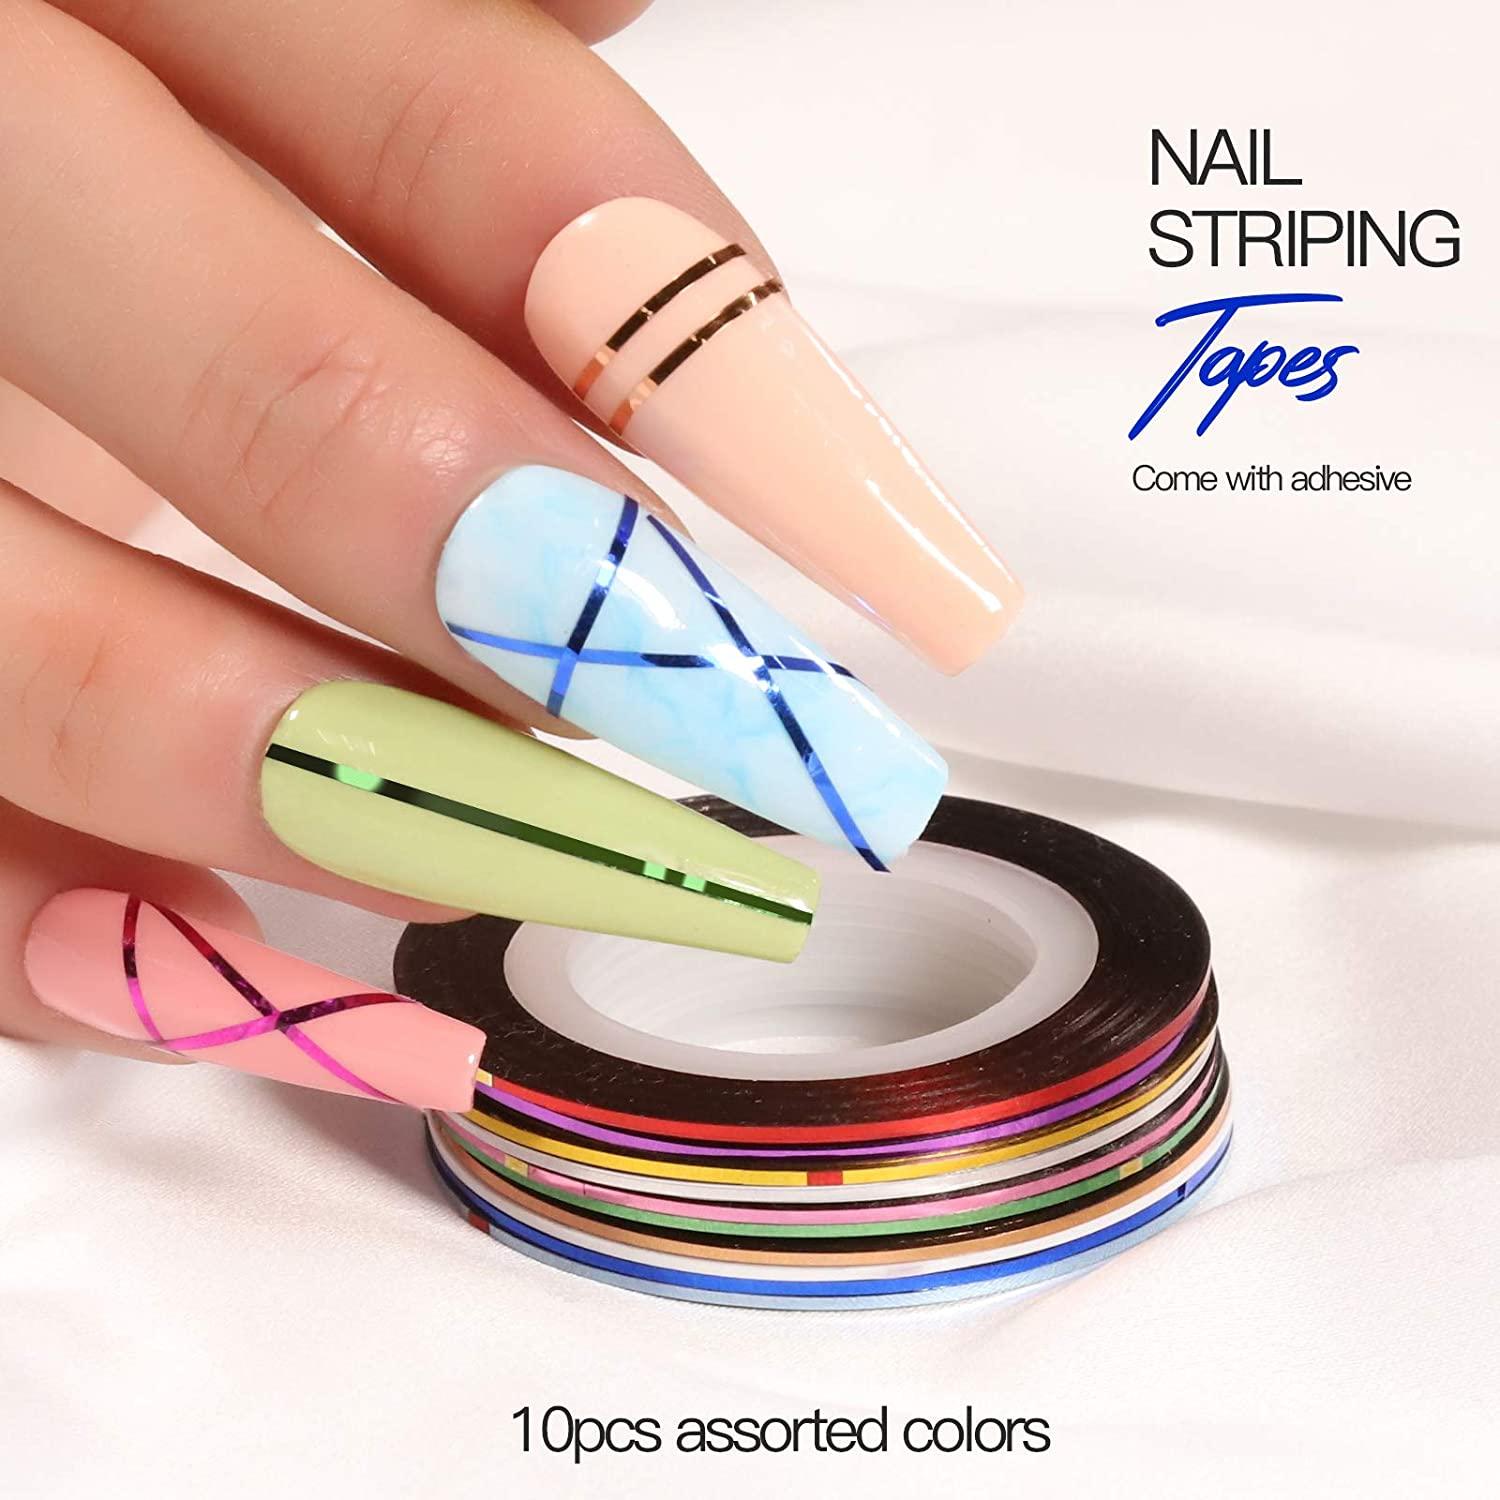 D.I.Y. Nails with Striping Tape